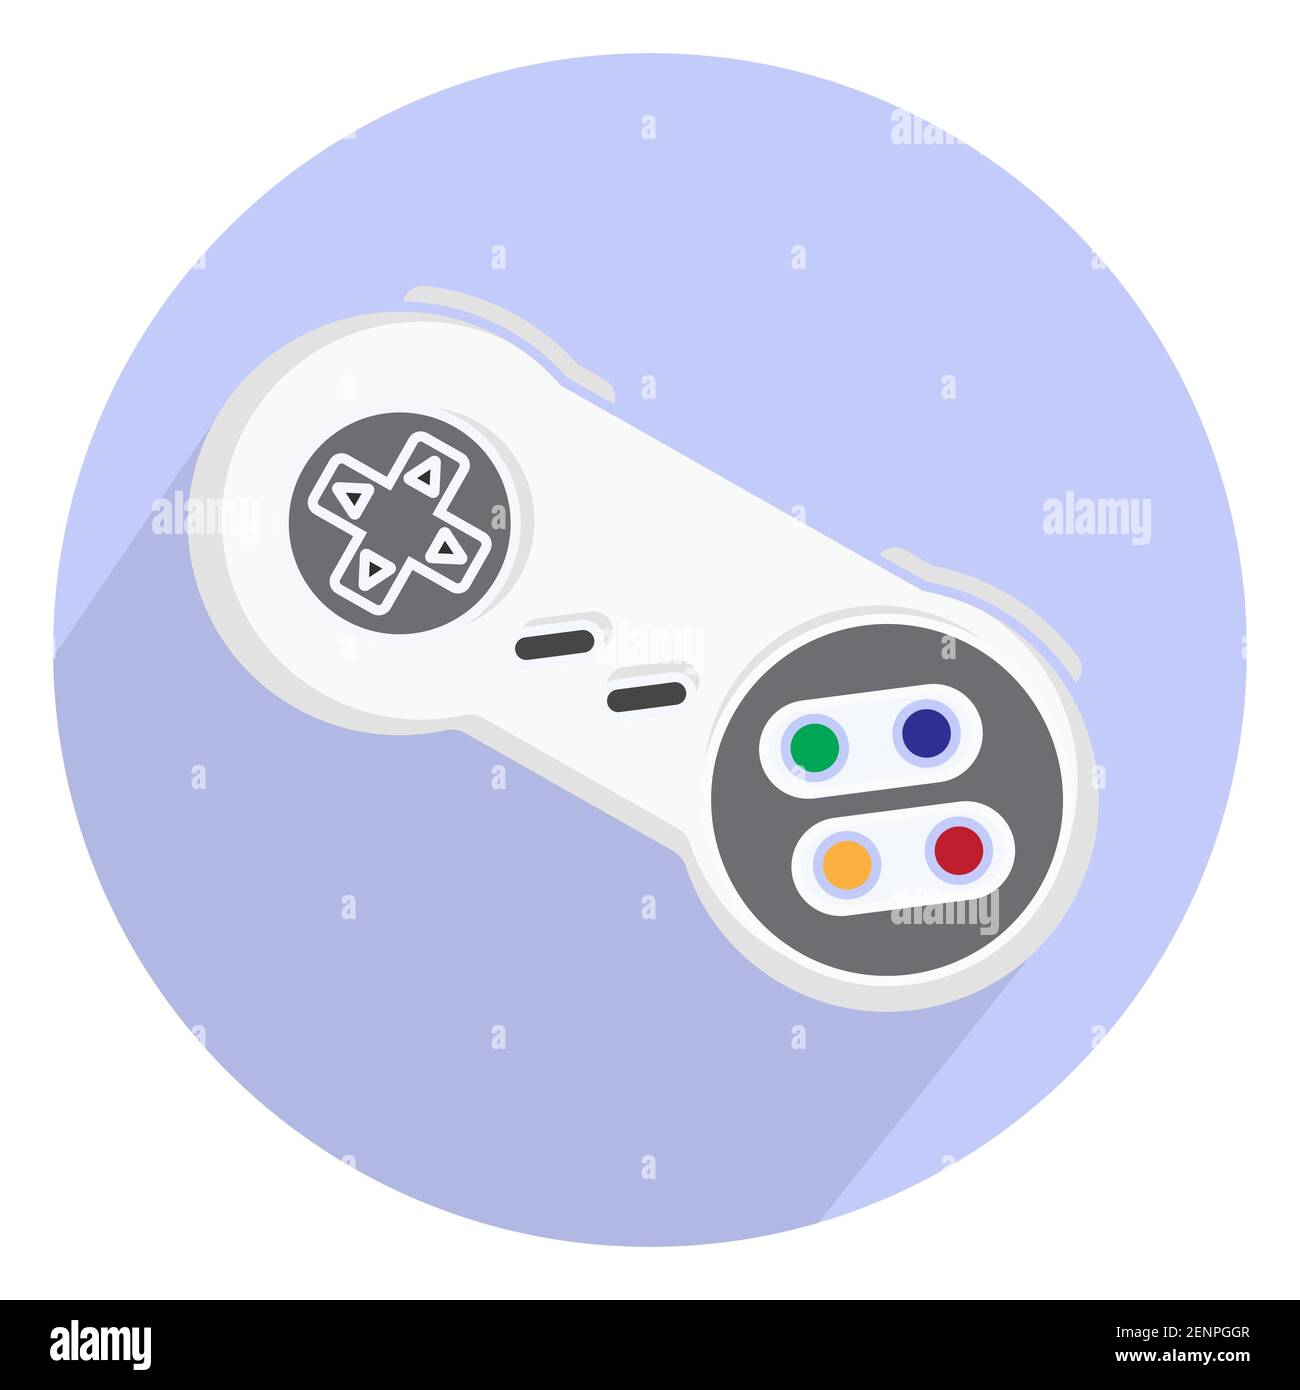 Retro video game controller or classical joystick flat icon isolated on round background Stock Vector